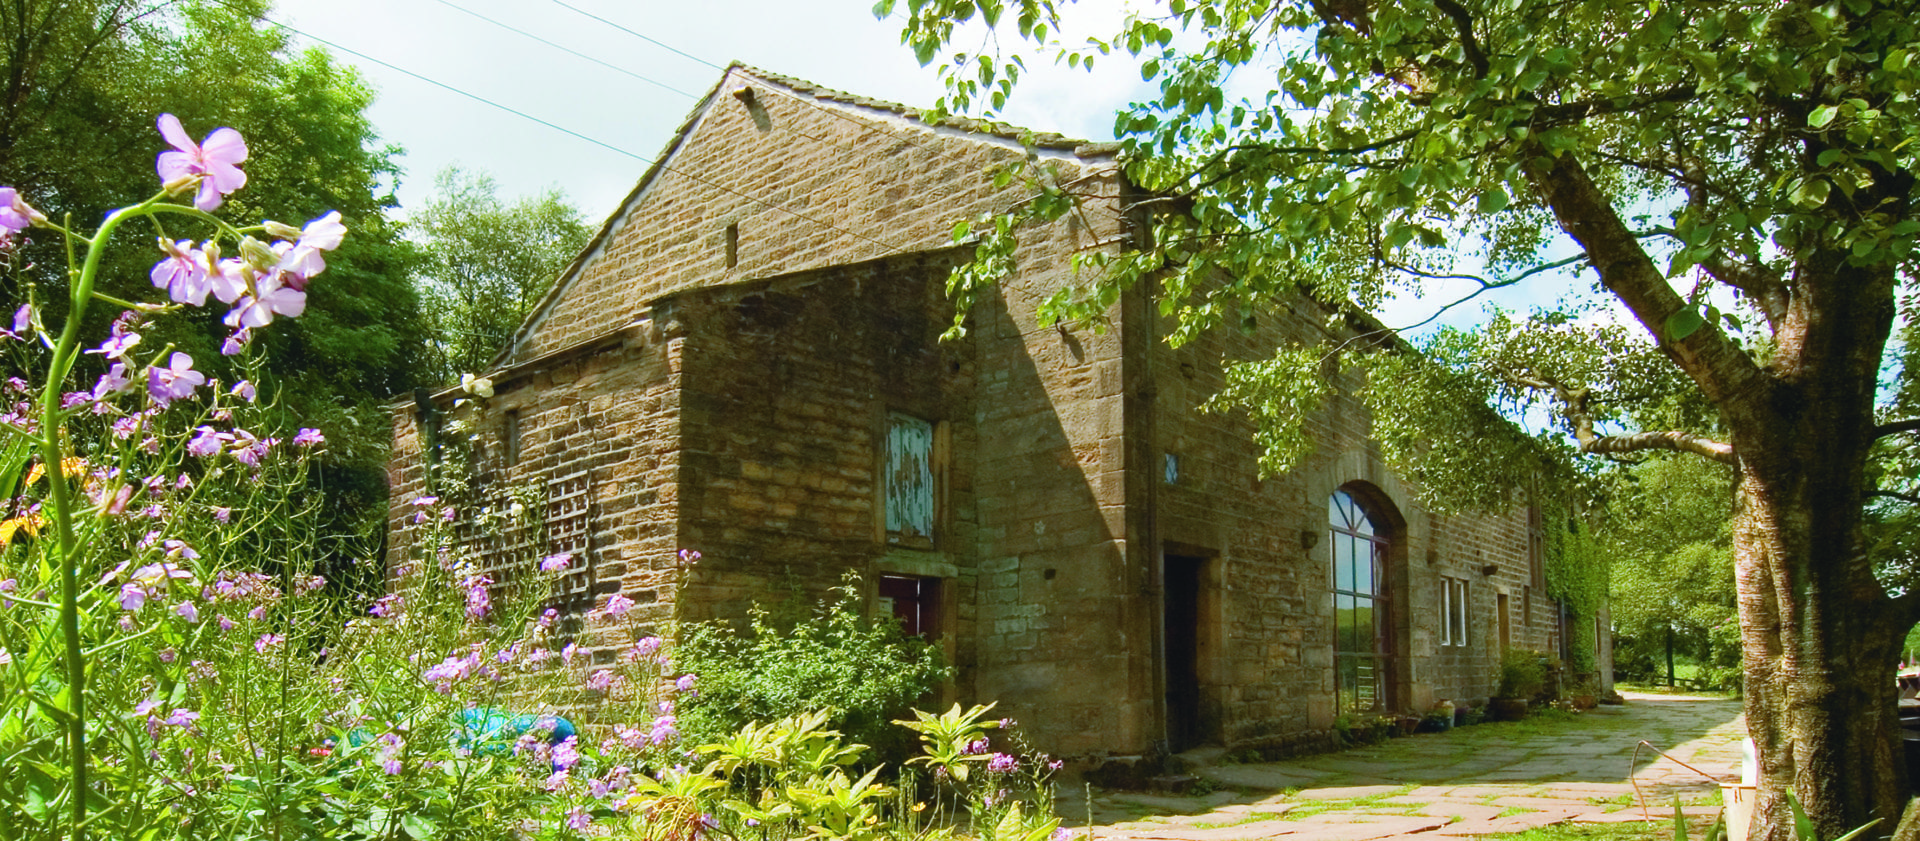 Trawden Camping Barn budget accommodation fro the South Pennines walk and ride festival